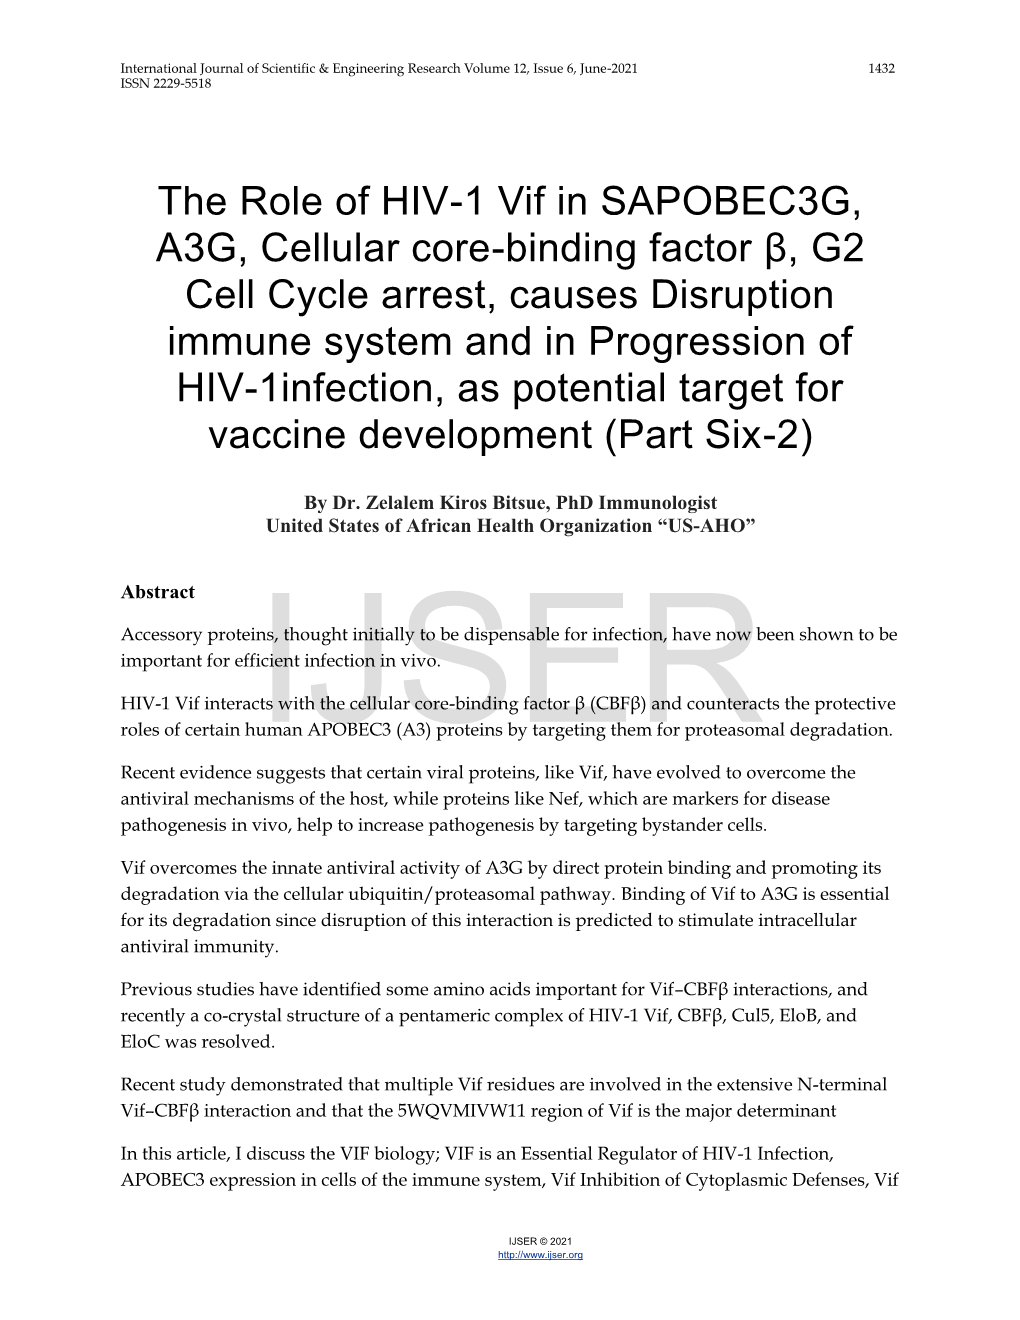 The Role of HIV-1 Vif in SAPOBEC3G, A3G, Cellular Core